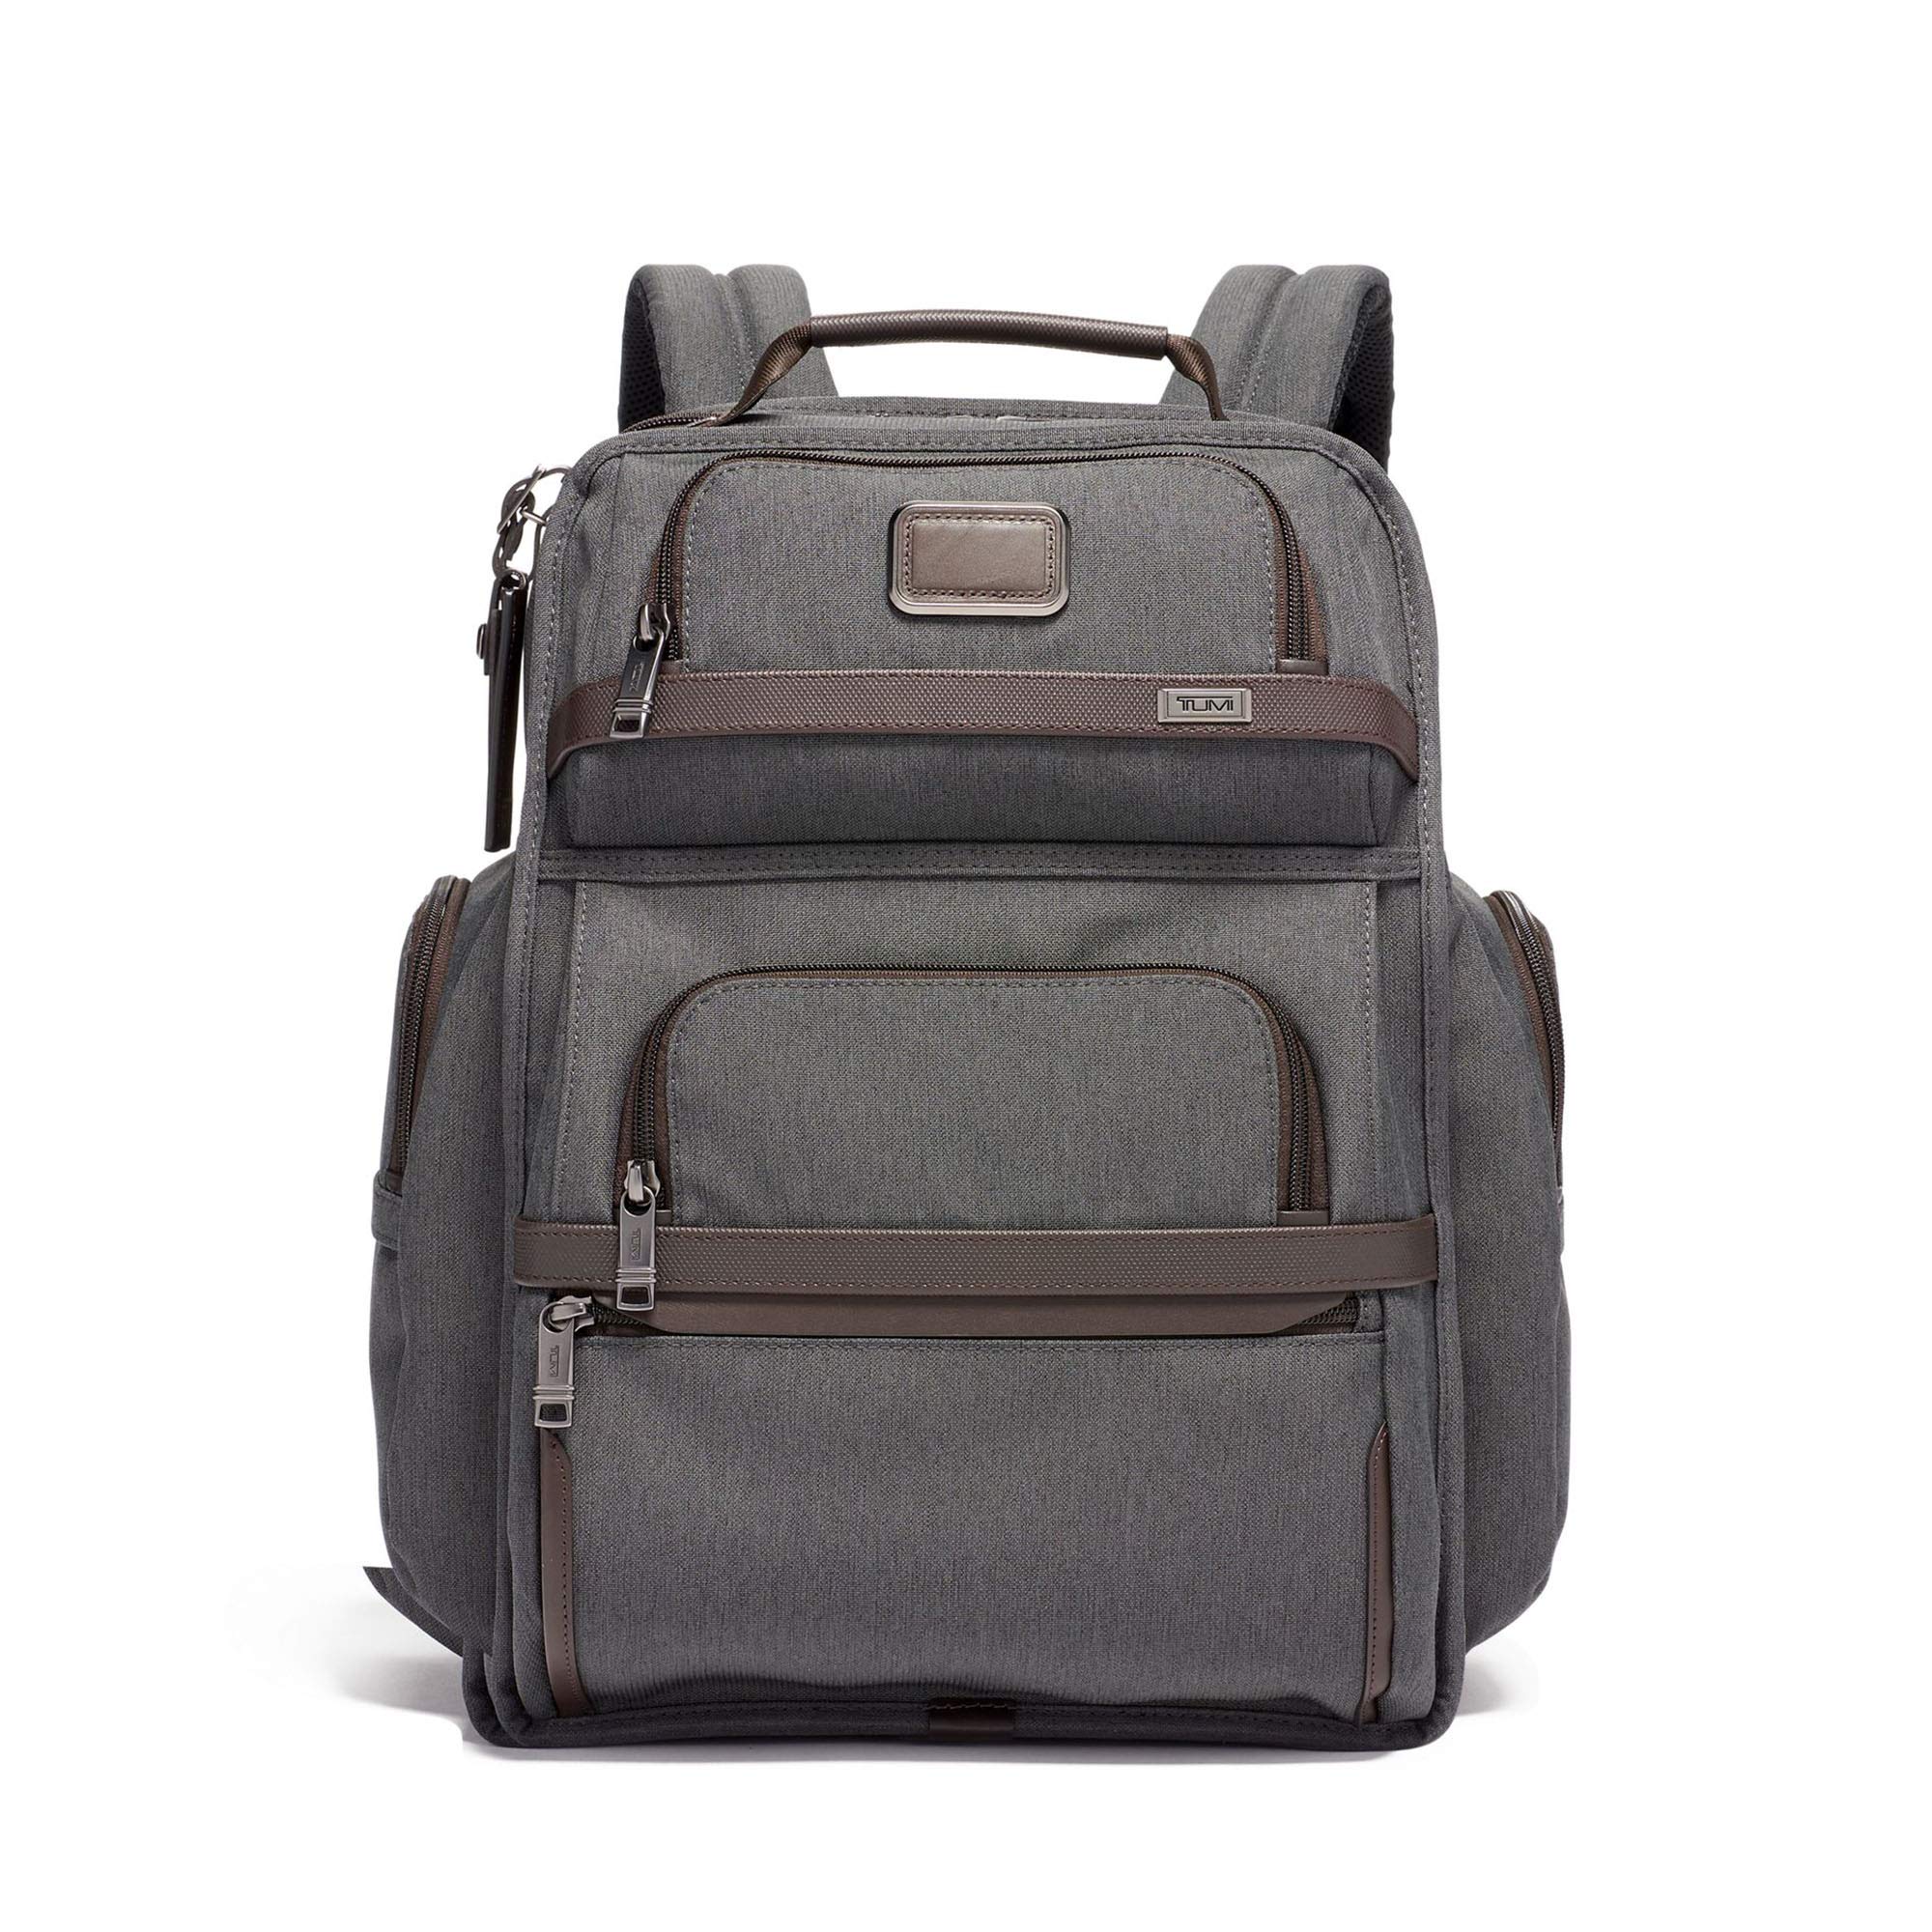 TUMI - Alpha 3 Brief Pack - 15 Inch Computer Backpack for Men and Wome ...